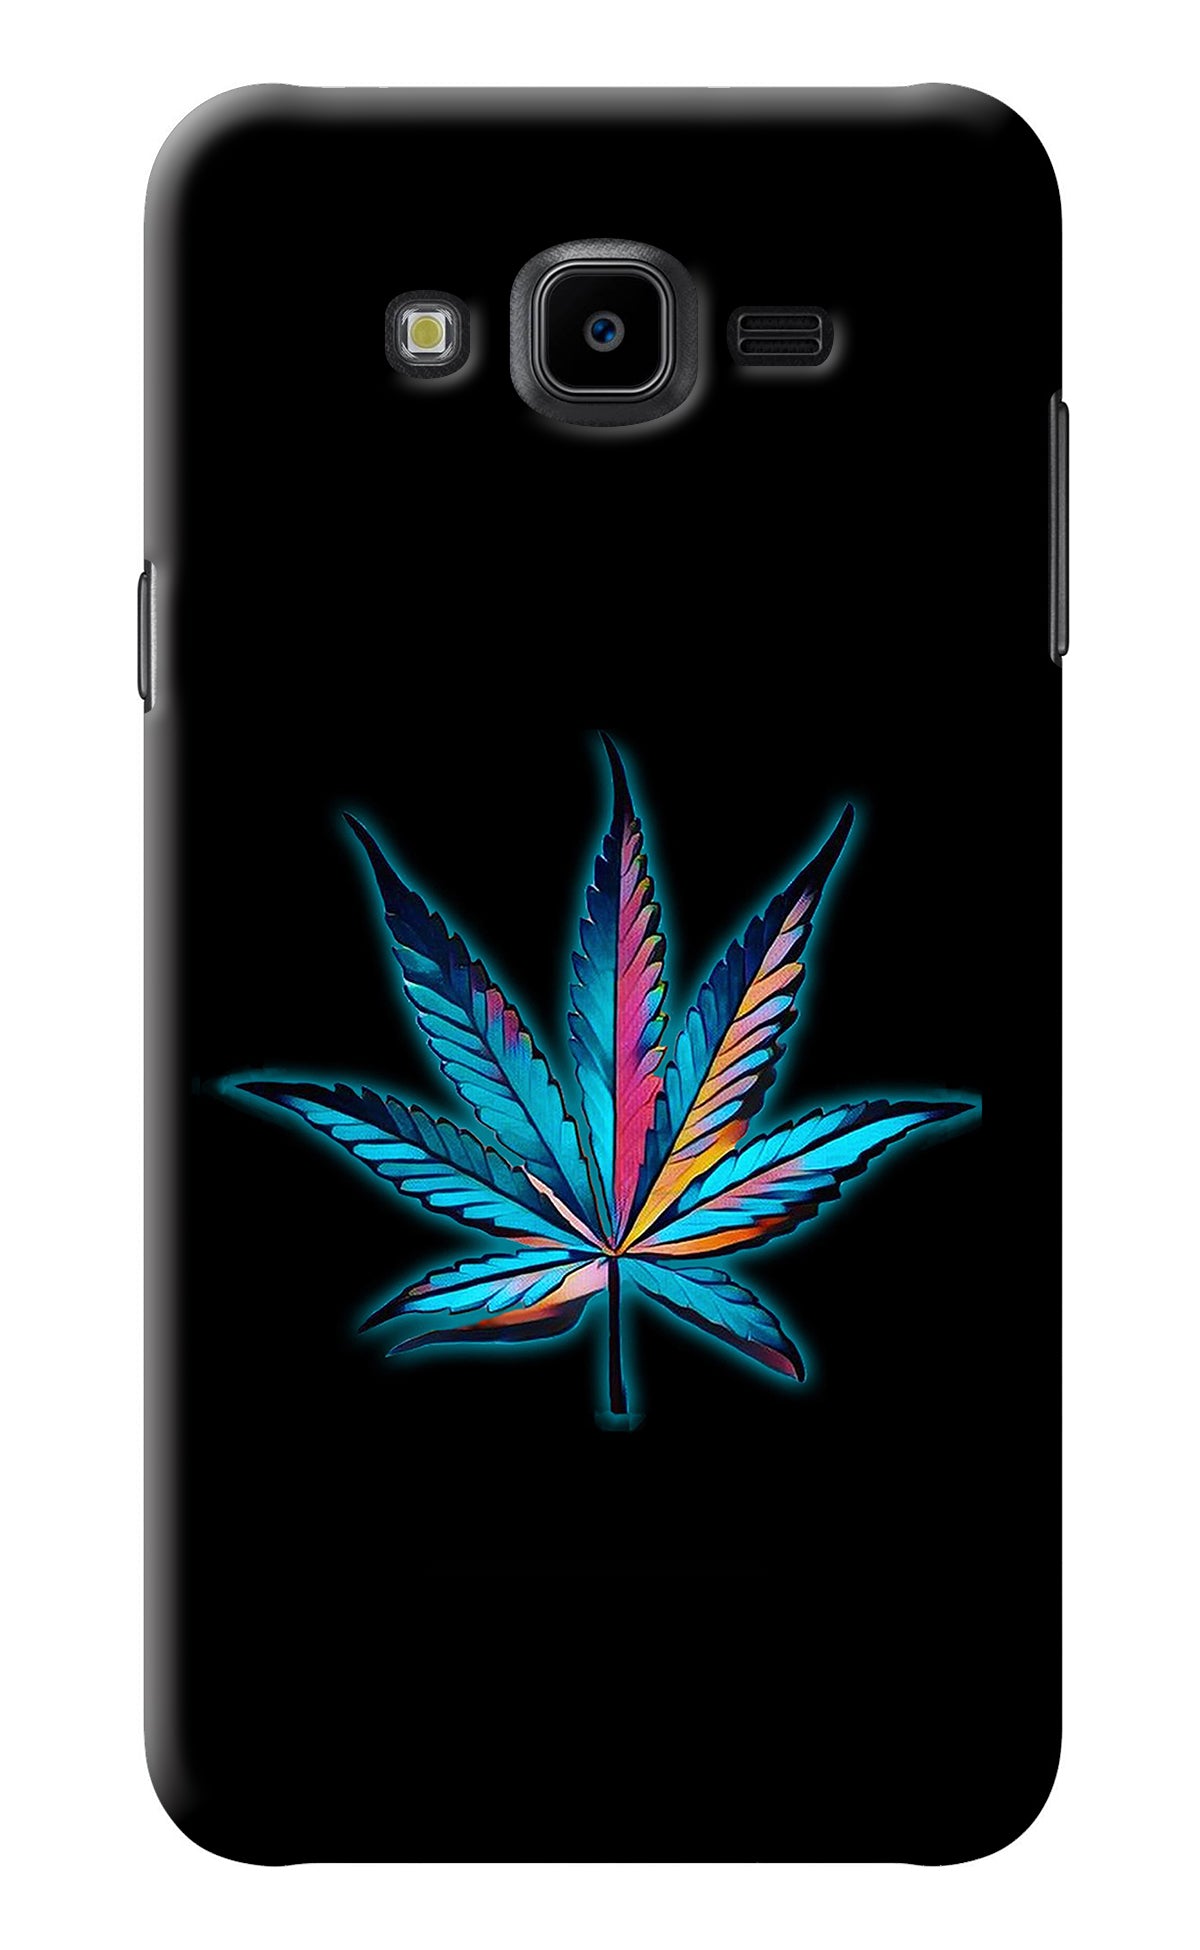 Weed Samsung J7 Nxt Back Cover